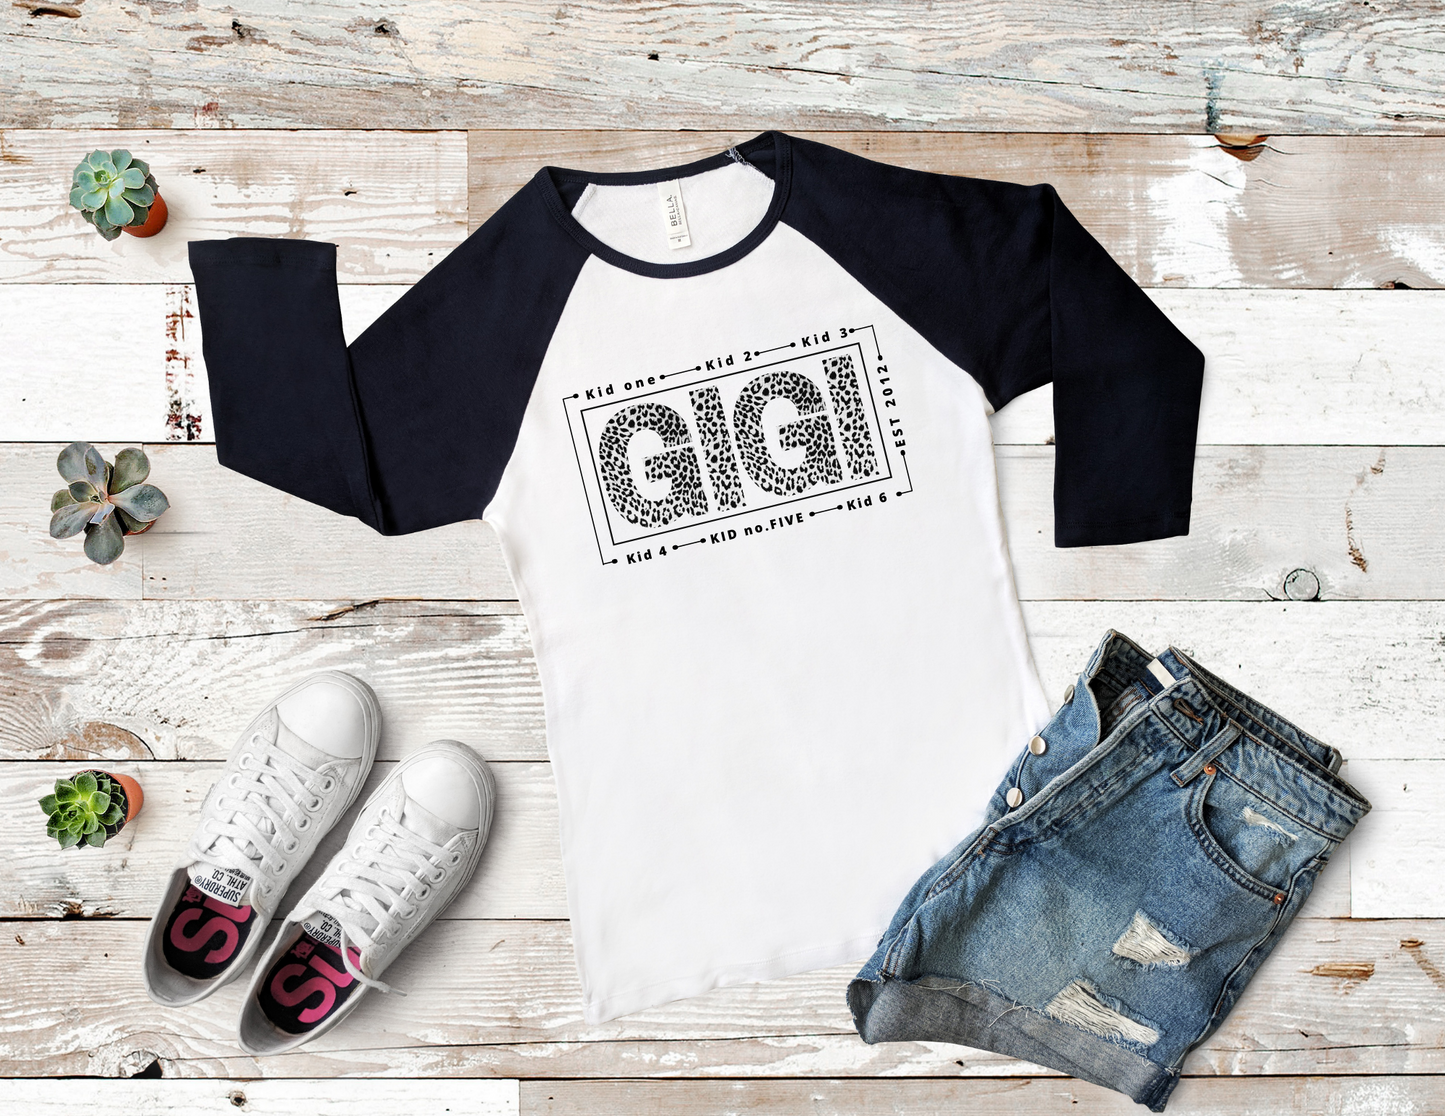 The "Ginger” Personalized Raglan